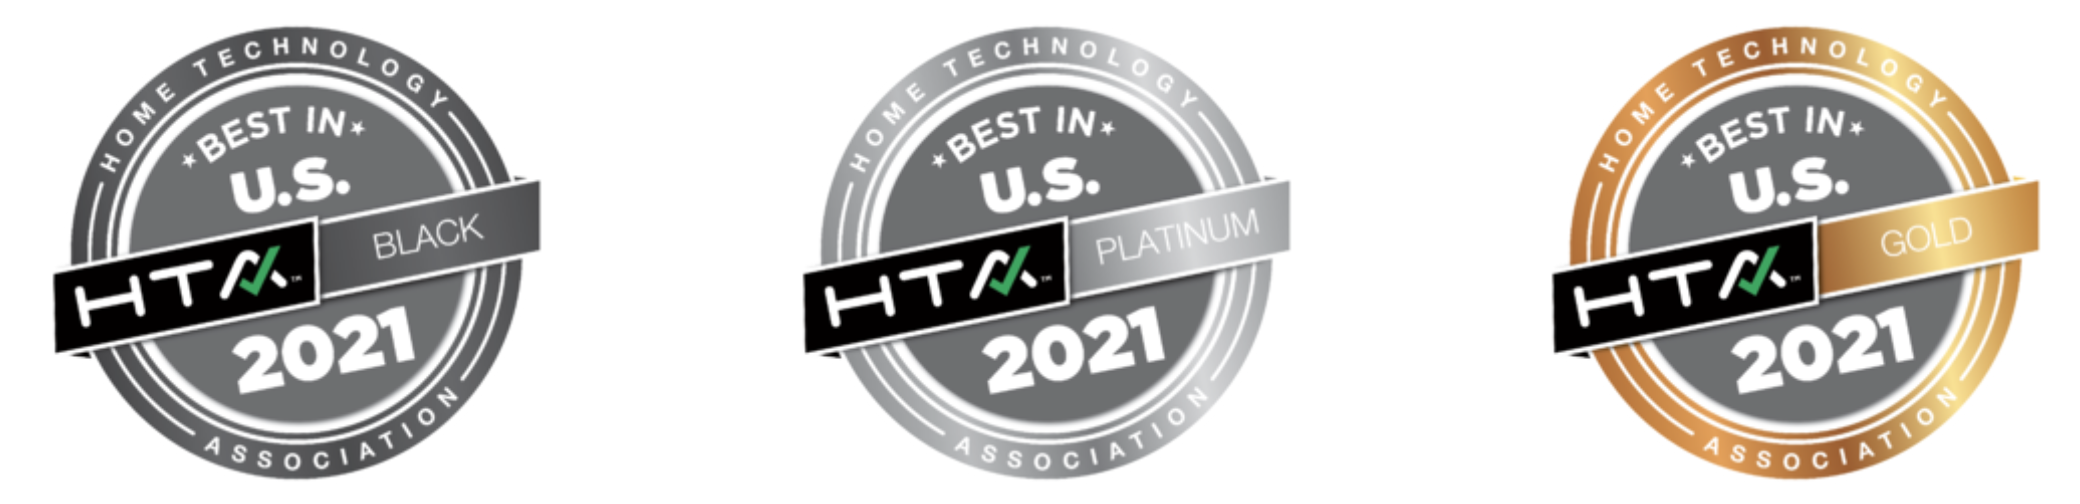 Home Technology Association Call for Entries Now Open for 2021 “Best in the U.S.” Awards